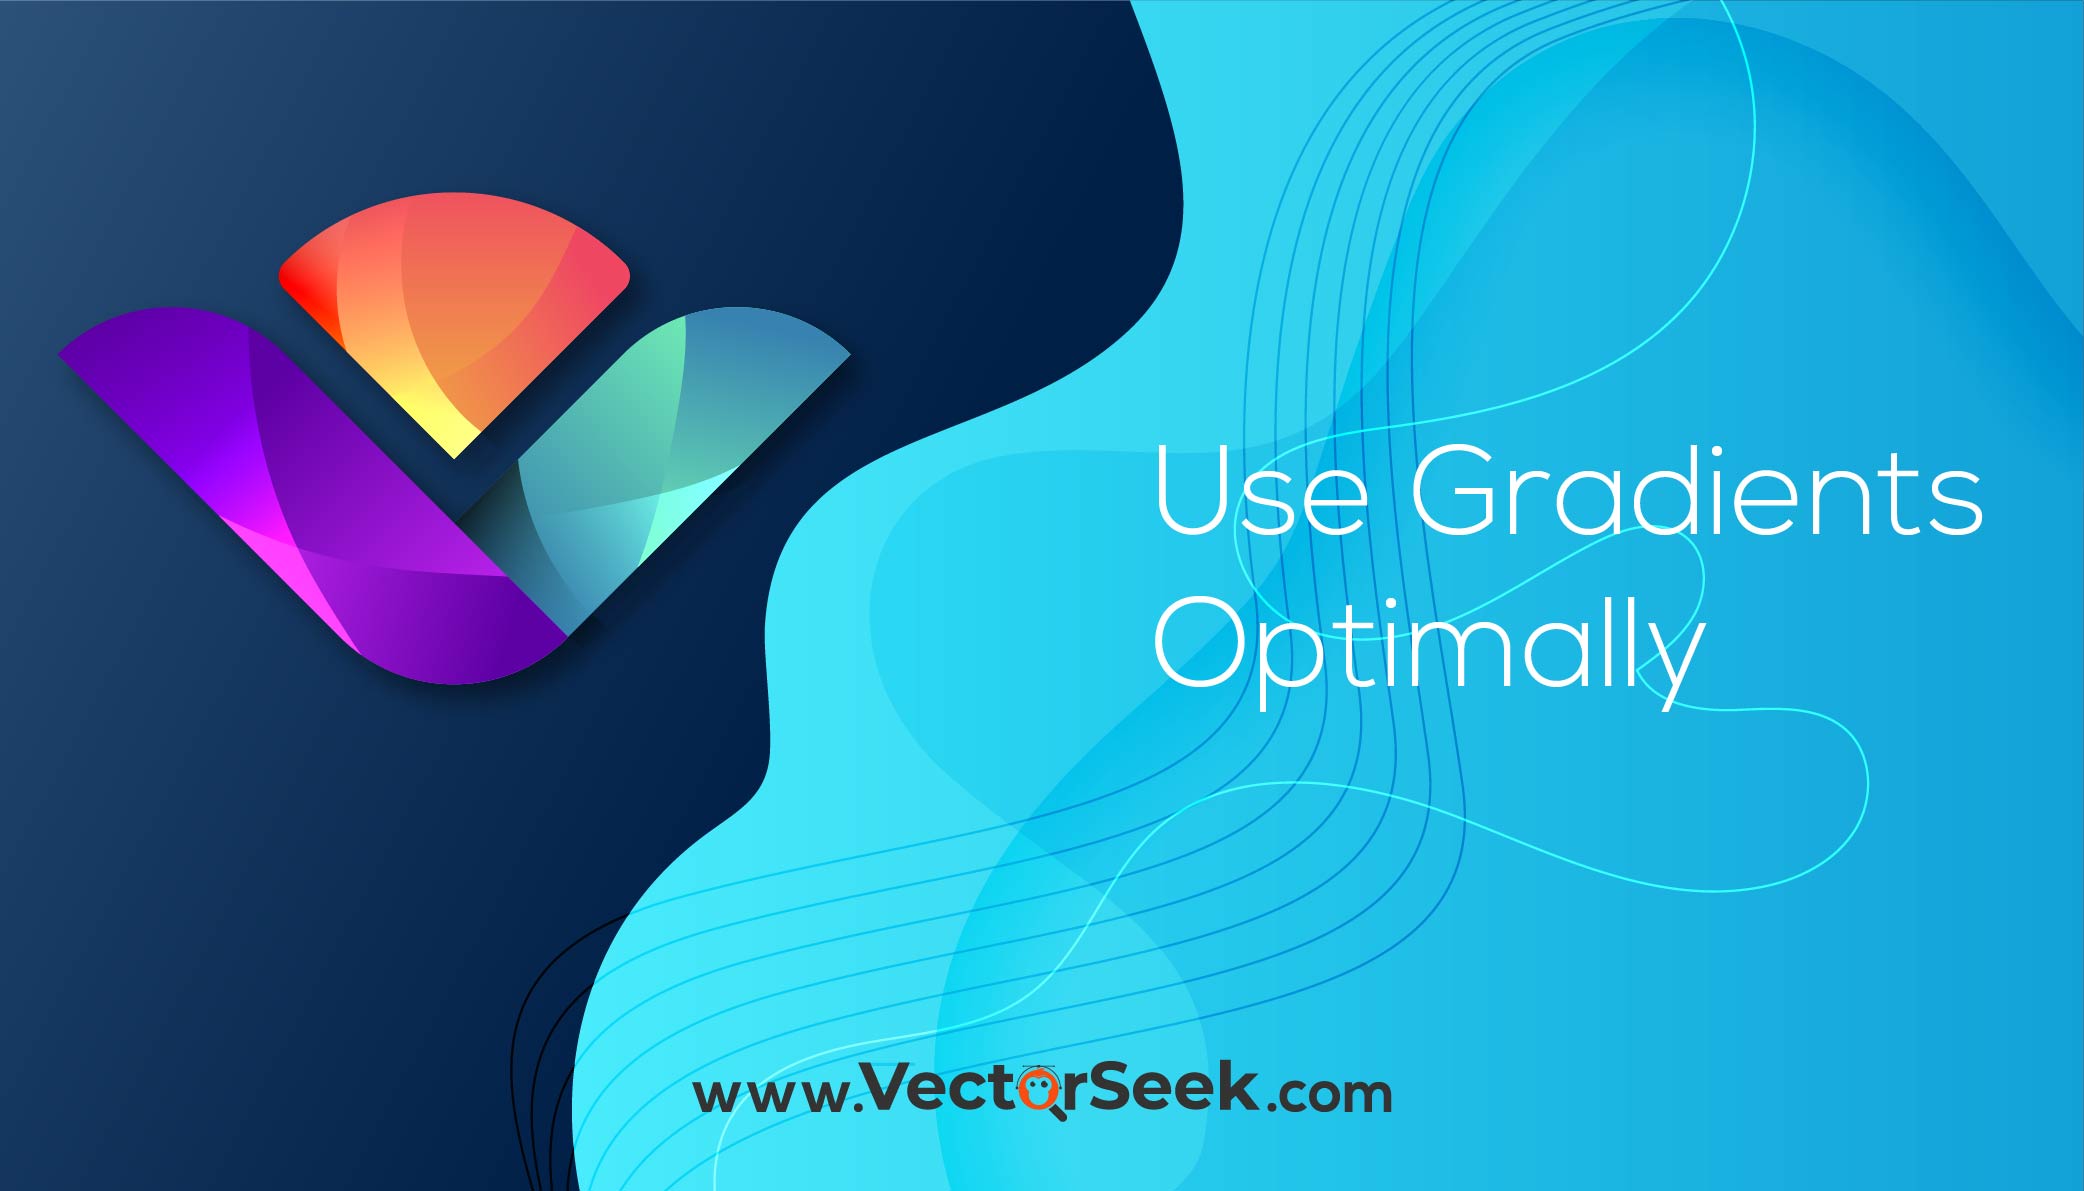 Use Gradients Optimally